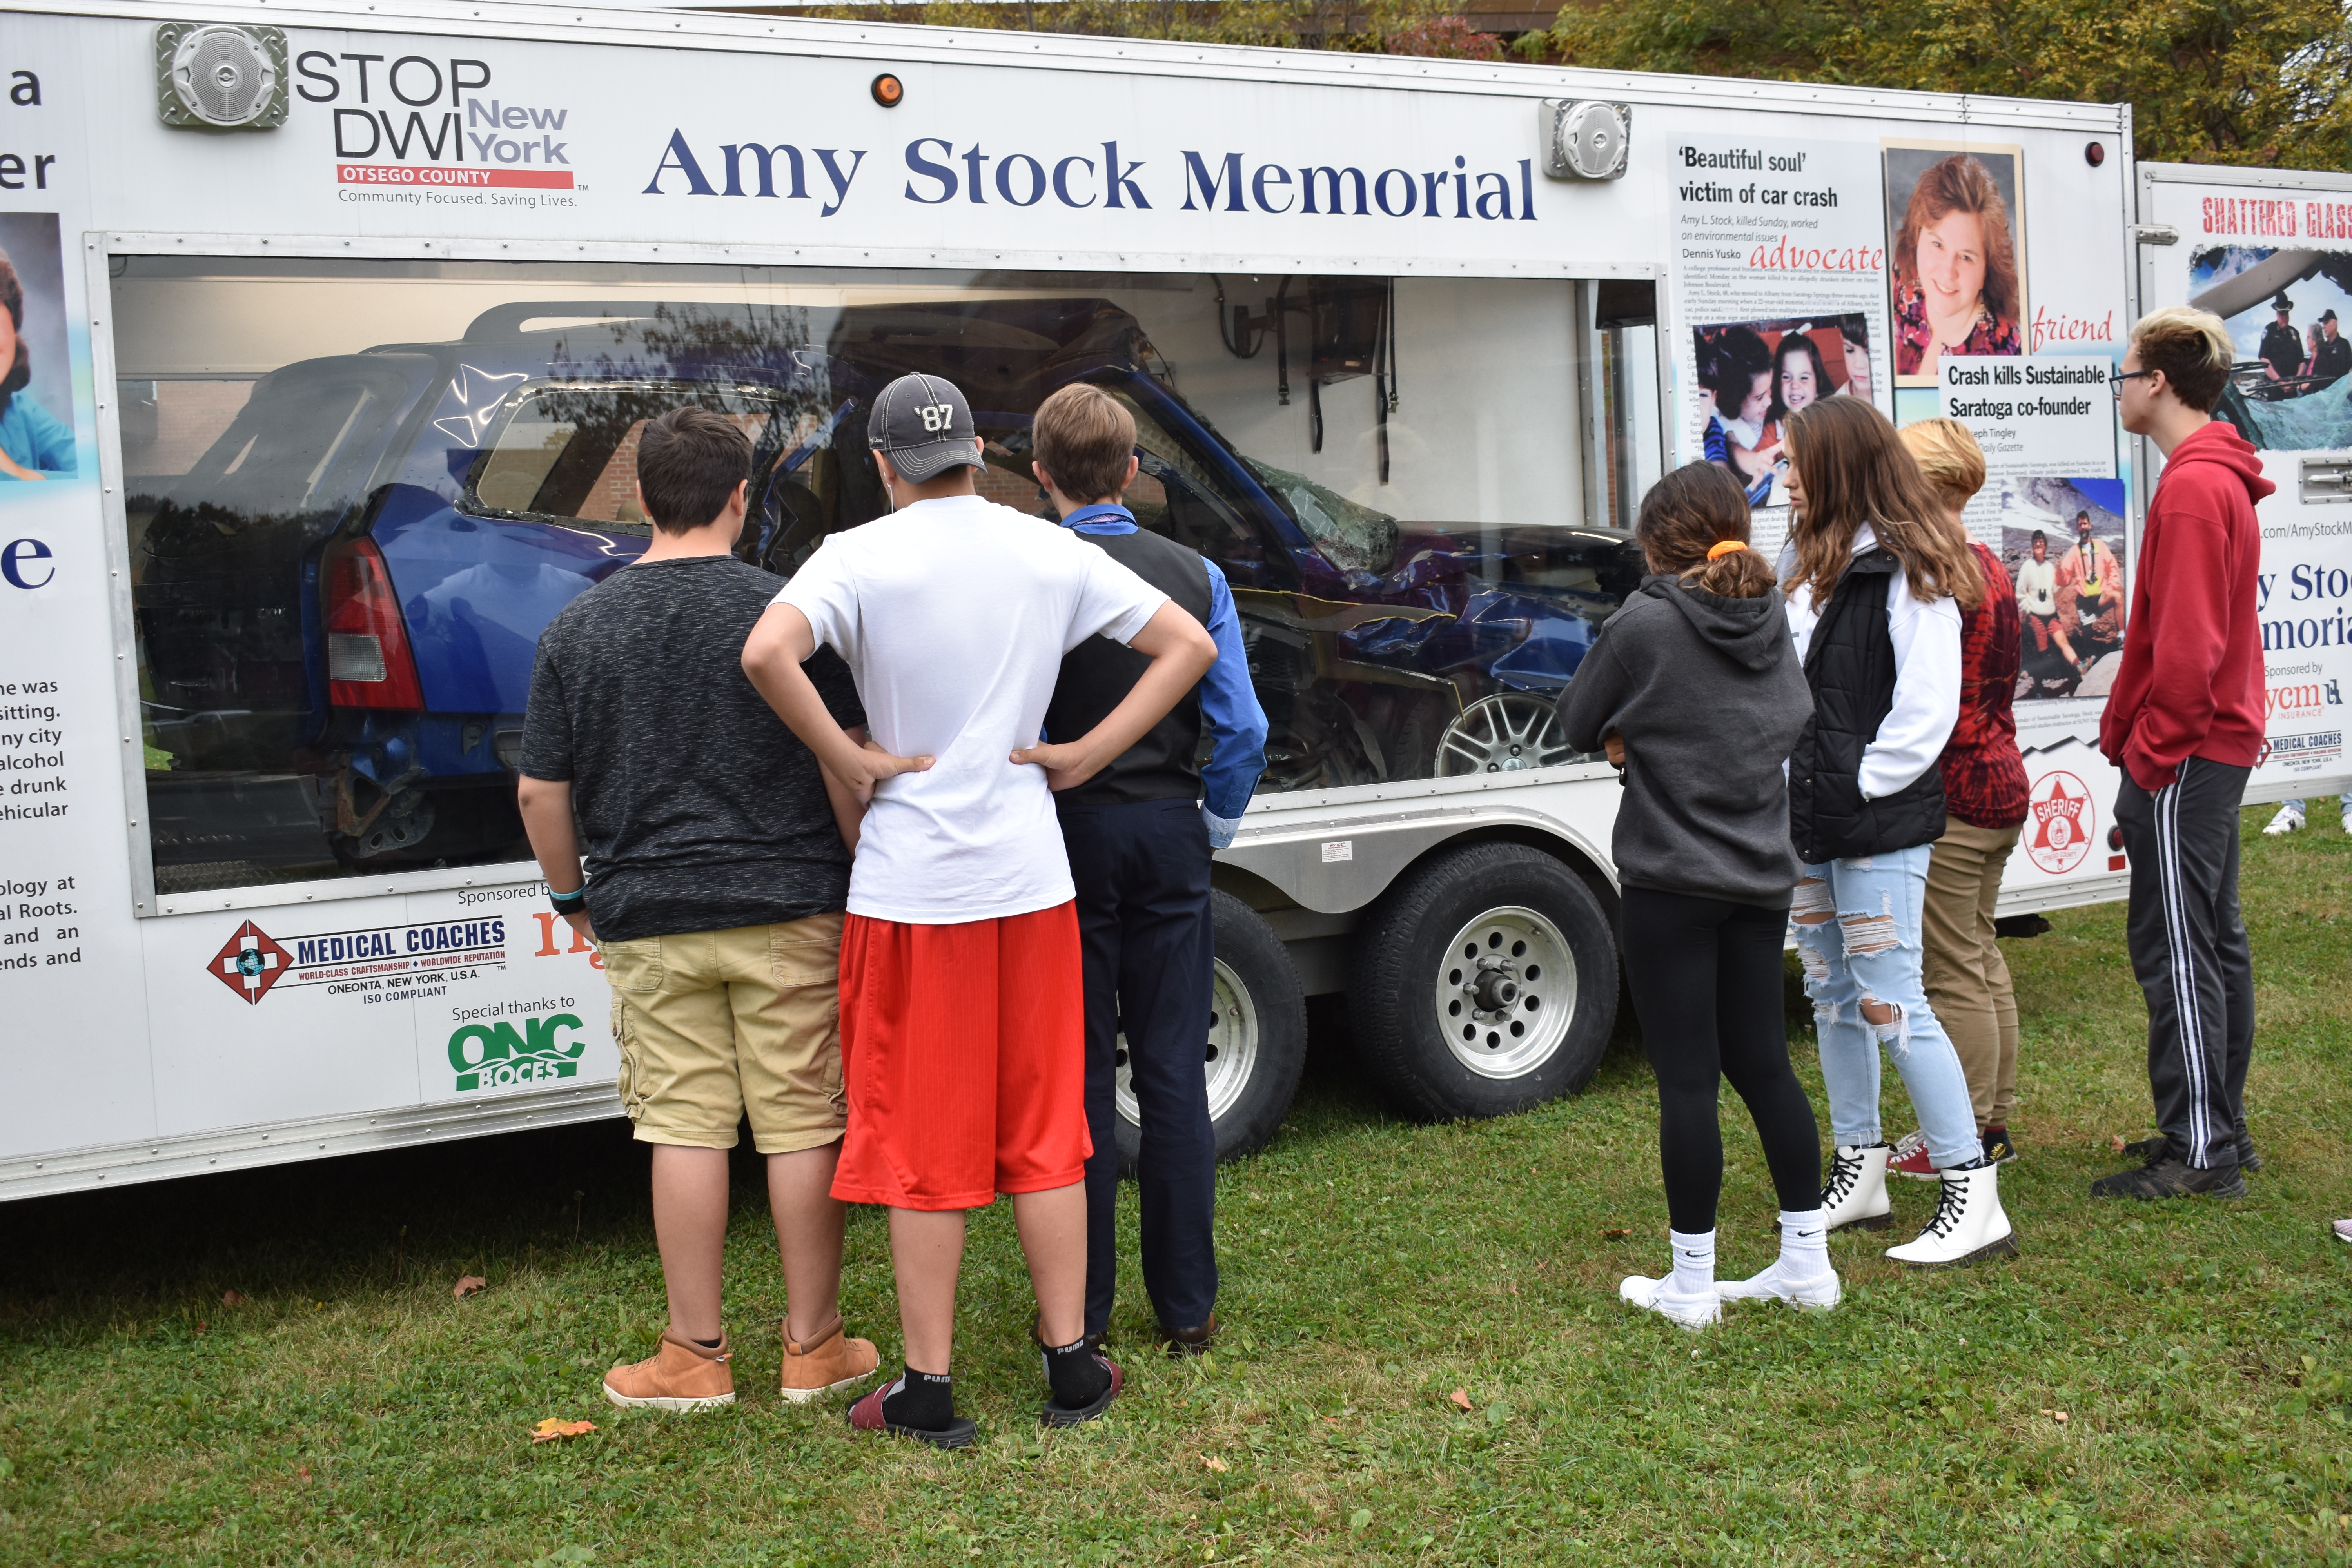 Students standing outside looking at memorial trailer